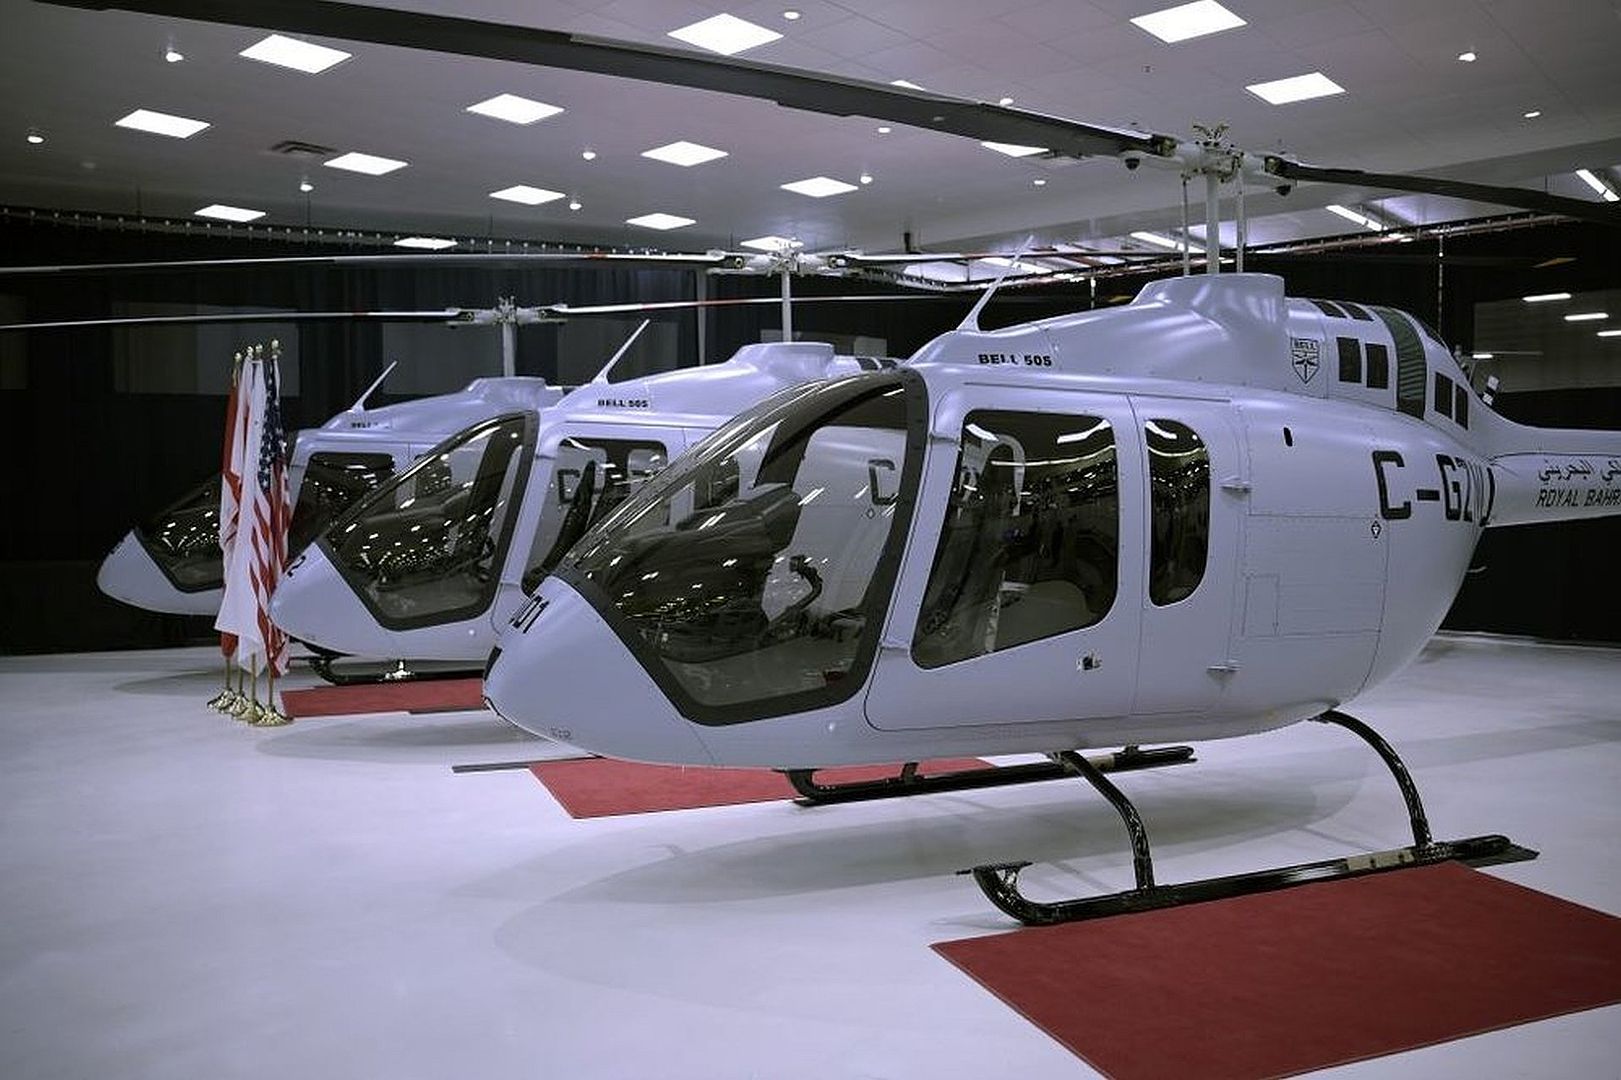 Bell 505 Helicopters To The Royal Bahrain Air Force